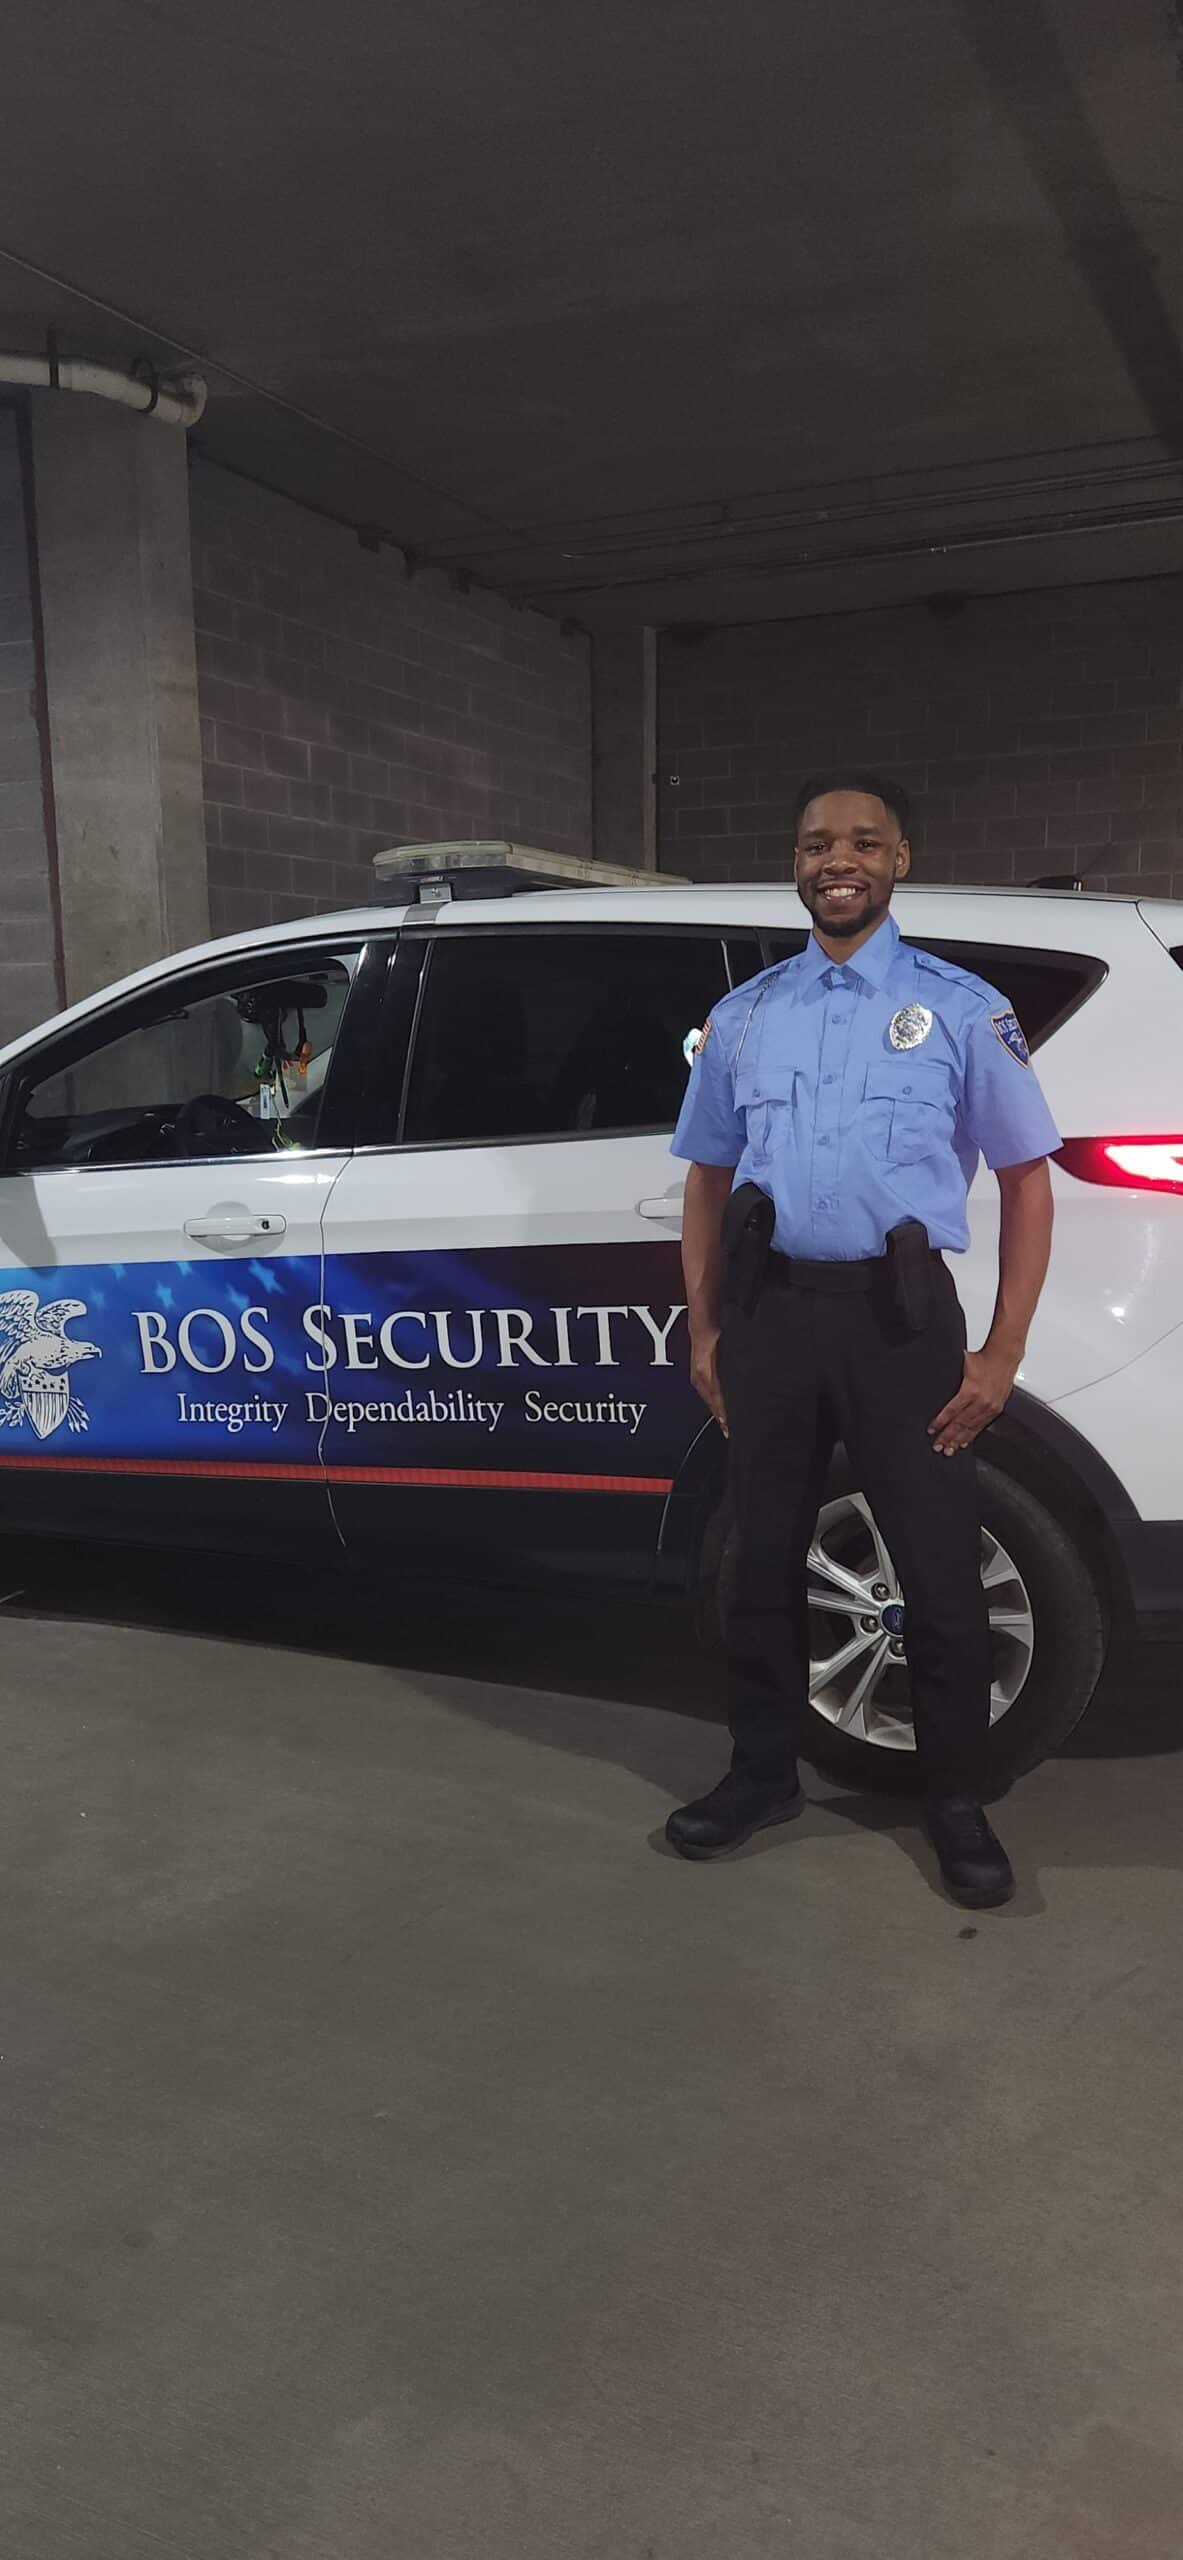 Officer Antorian Lattimore stands in front of a BOS Security patrol vehicle.